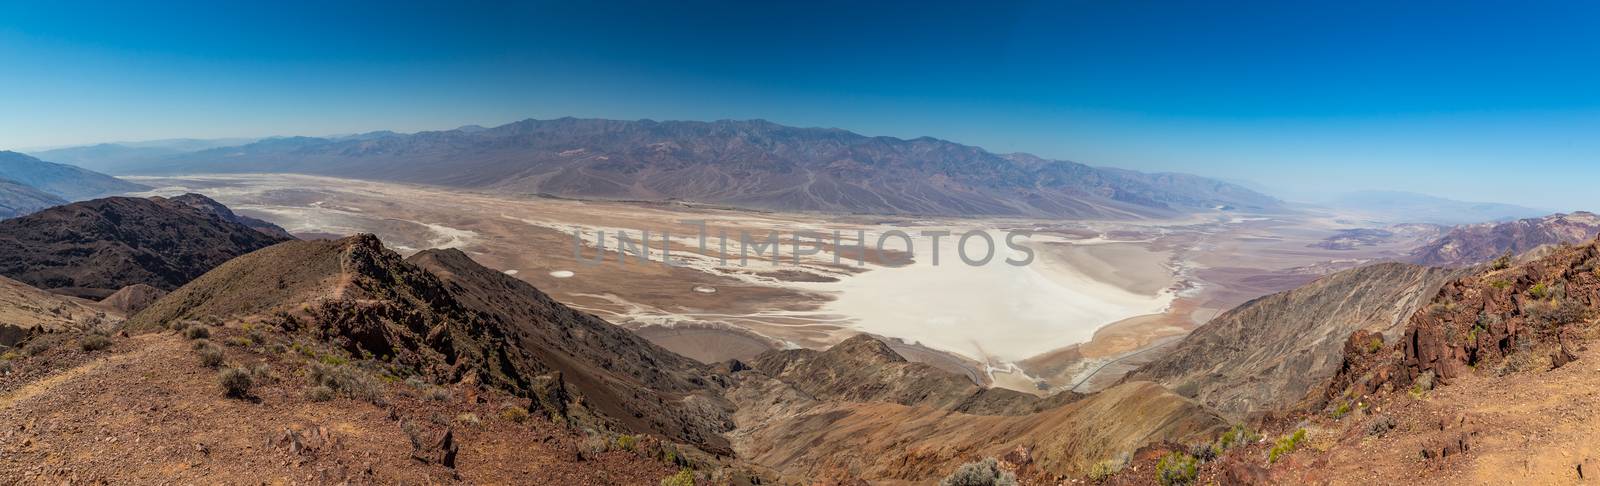 Dante's View is a viewpoint terrace at 1,669 m (5,476 ft) height, on the north side of Coffin Peak, along the crest of the Black Mountains, overlooking Death Valley. Dante's View is about 25 km (16 mi) south of Furnace Creek in Death Valley National Park.